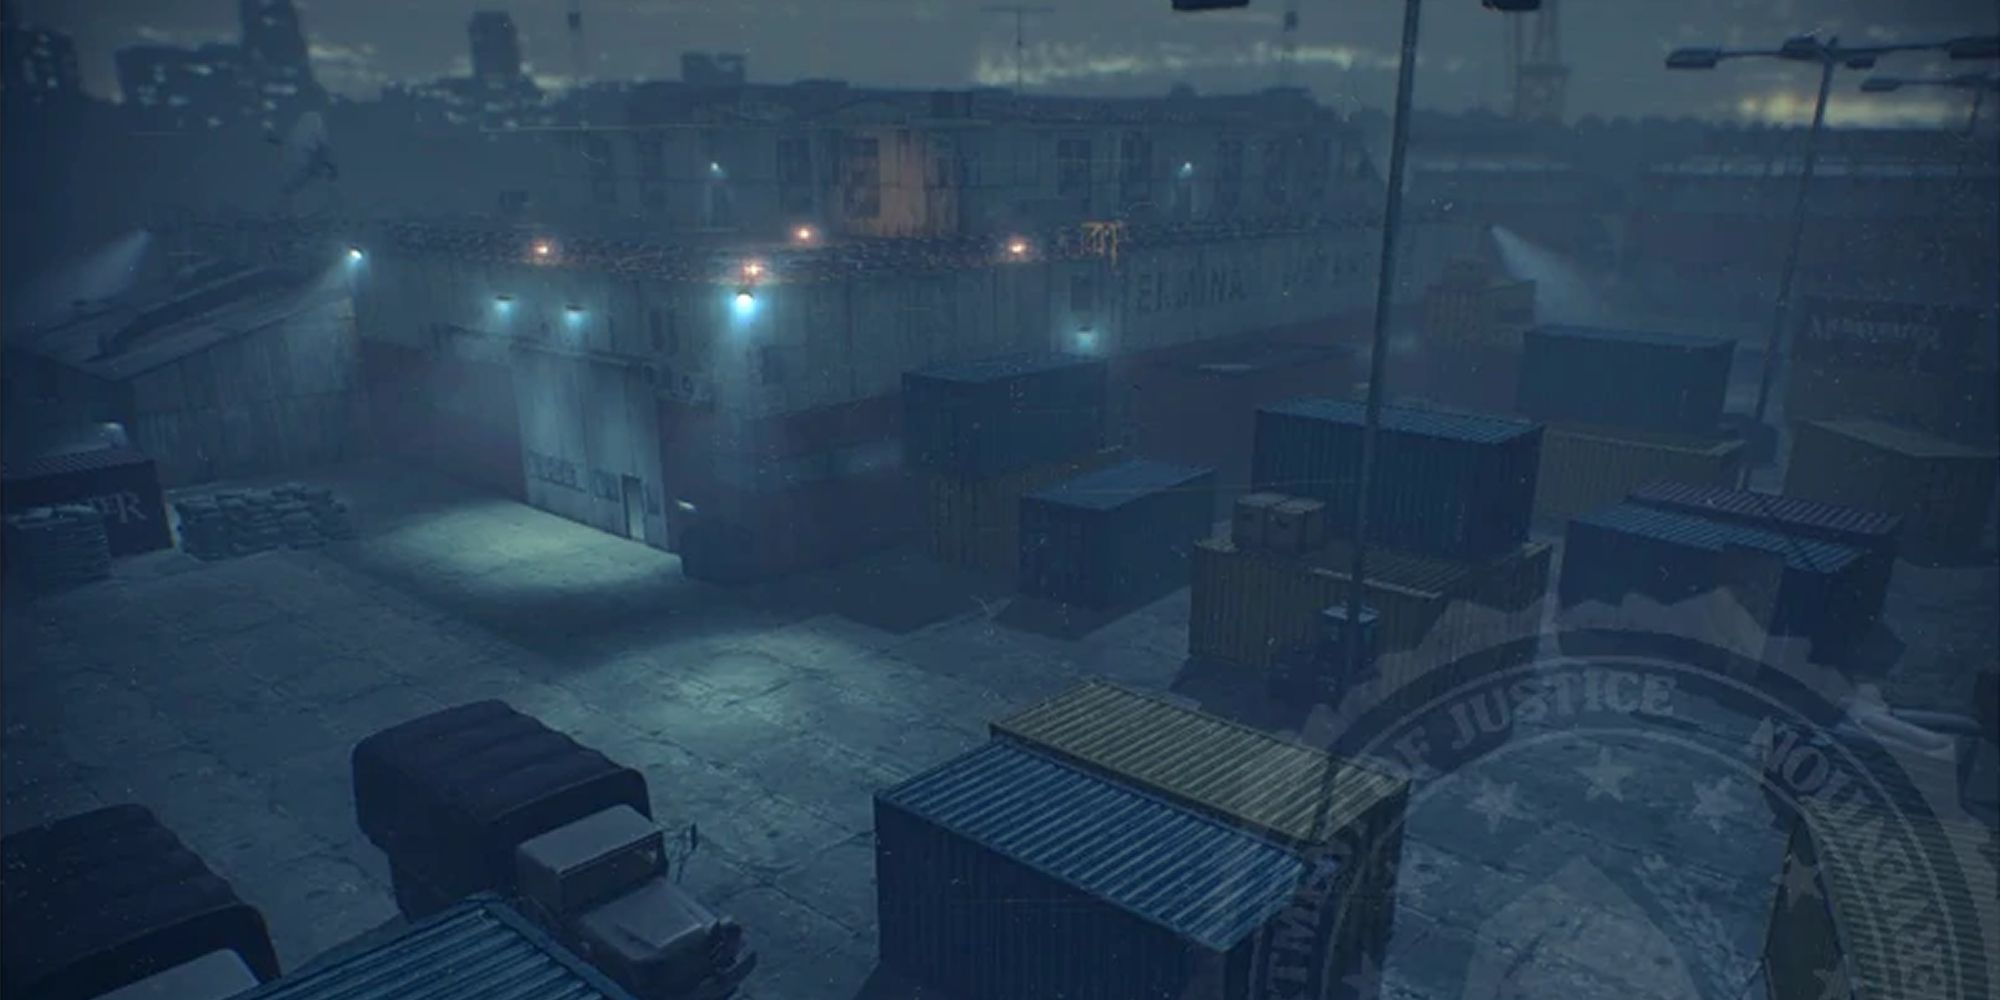 The Shadow Raid Setting With Cargo Containers